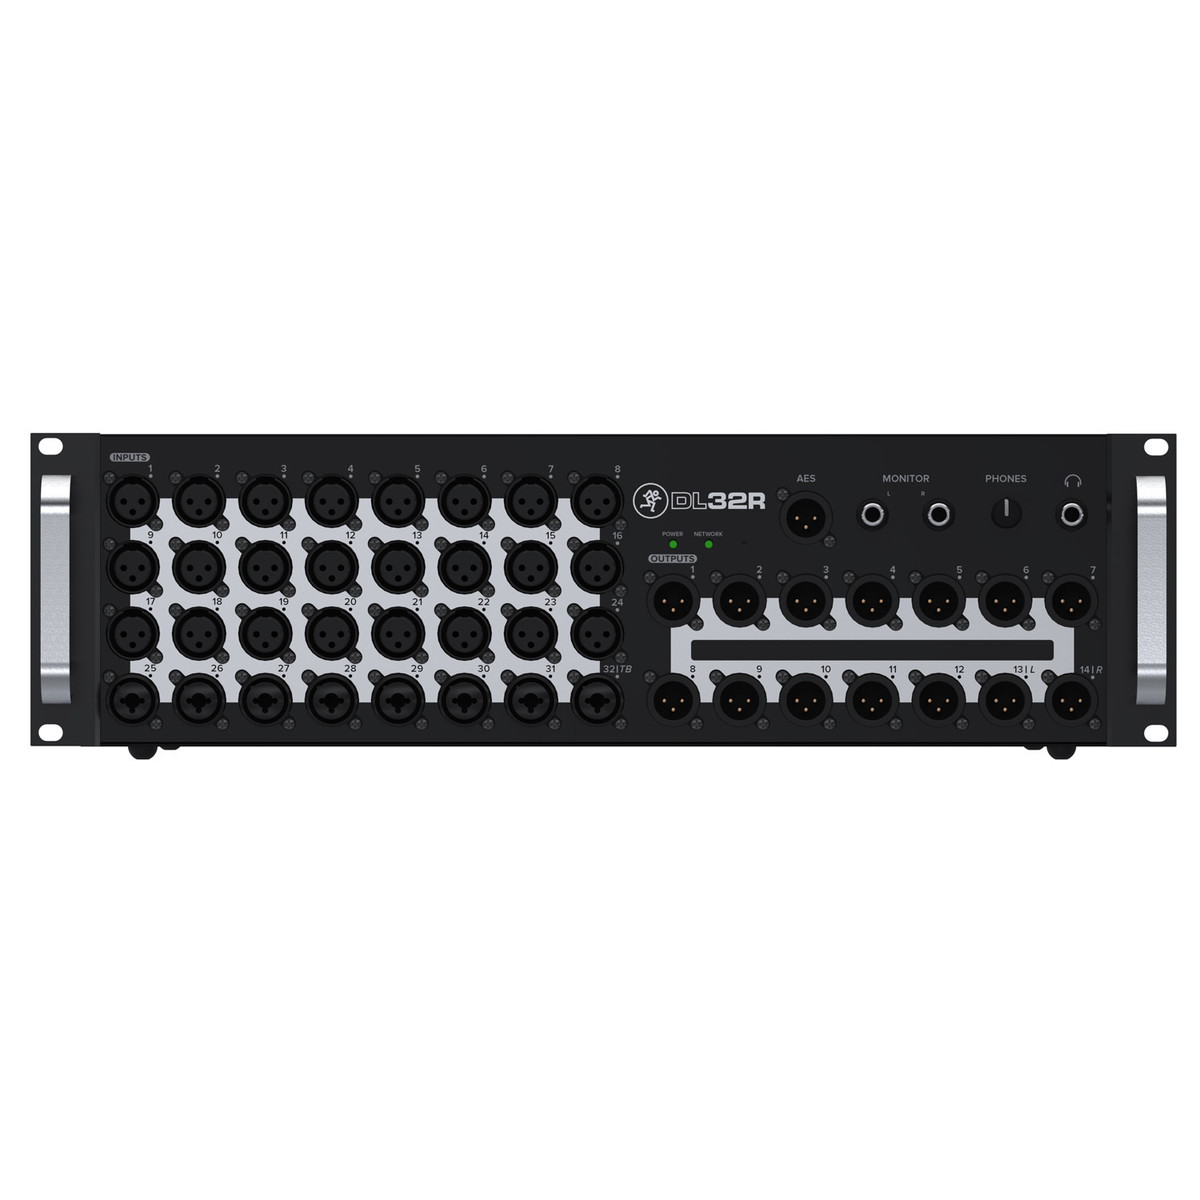 Mackie Dl32r Pour Ipad - Recorder in rack - Variation 2